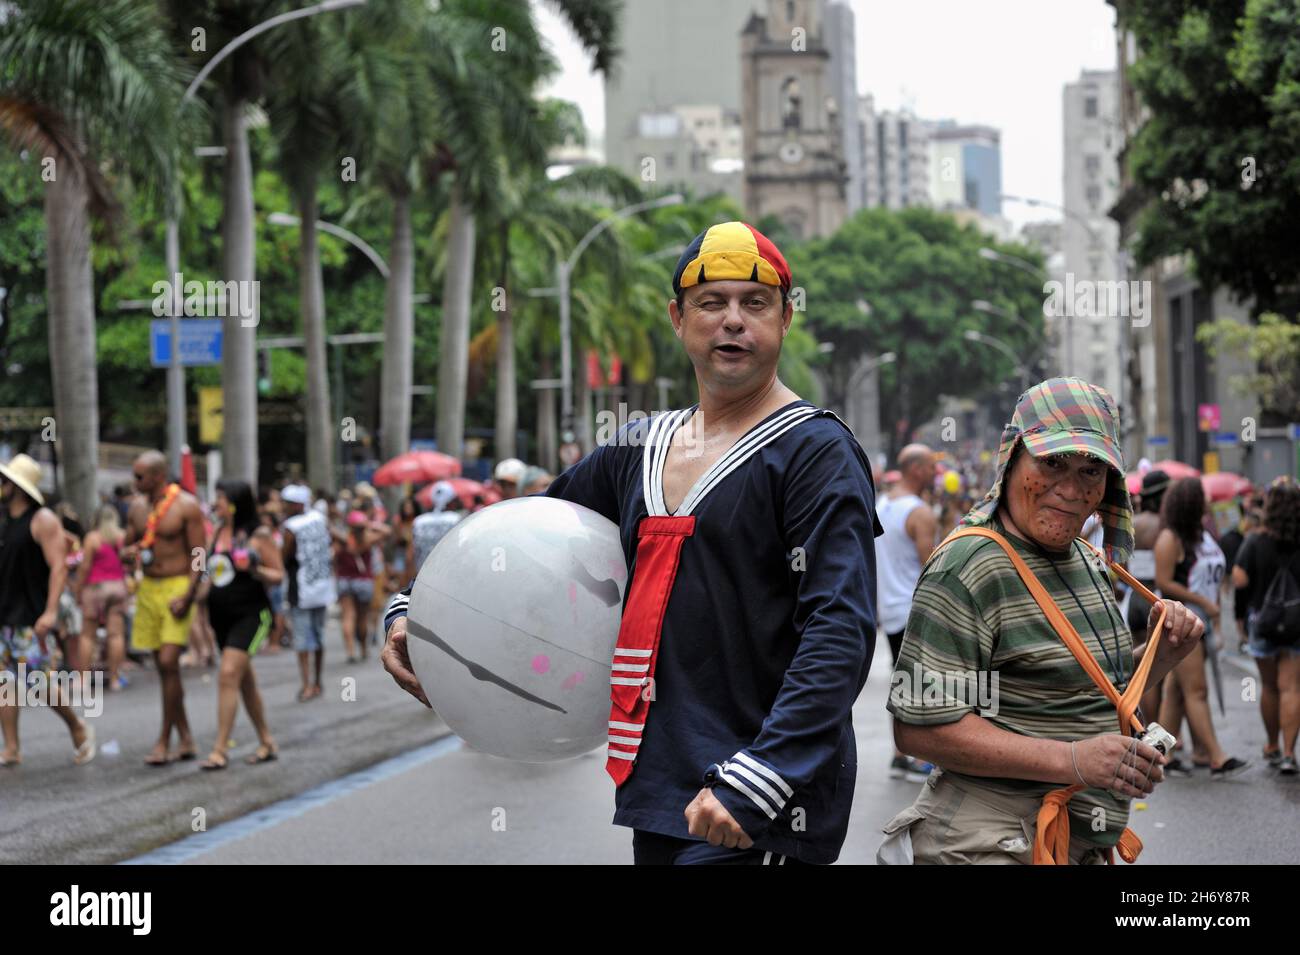 Brazil - February 22, 2020: Revelers dressed up as El Chavo television sitcom characters perform during a Carnival street party held in Rio de Janeiro Stock Photo